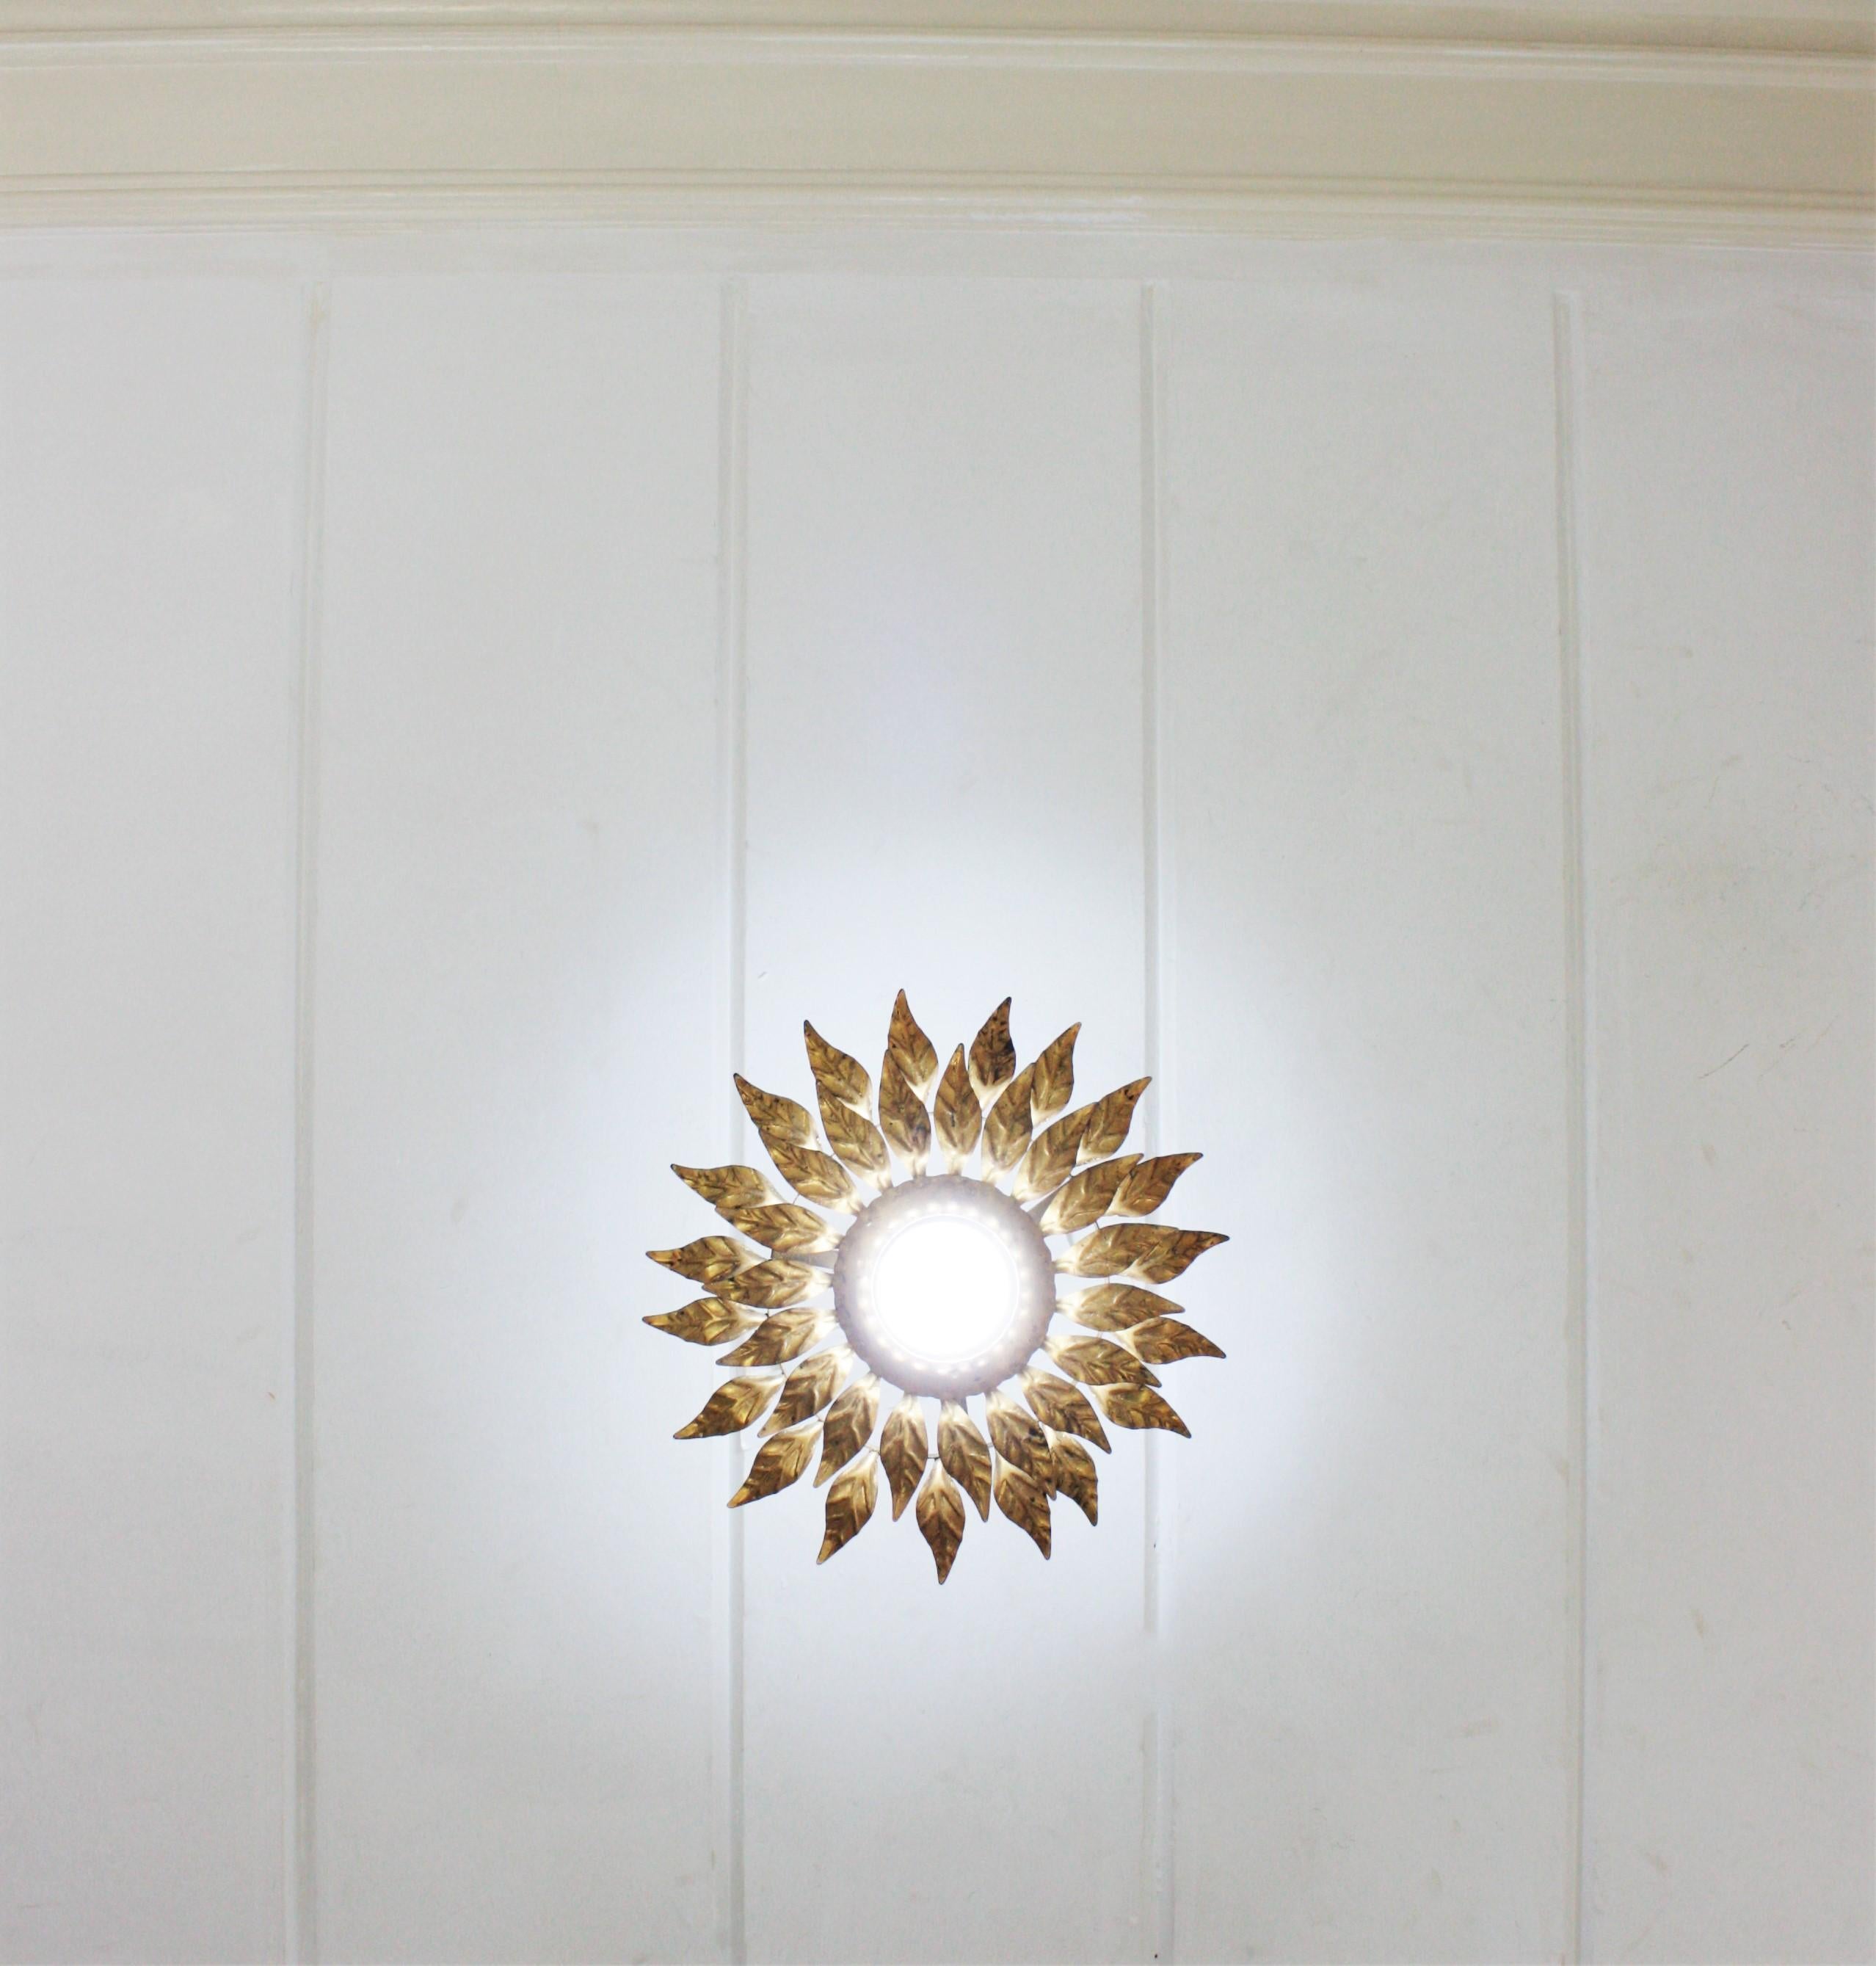 Spanish Sunburst Light Fixture in Gilt Iron with Double Leafed Frame For Sale 4